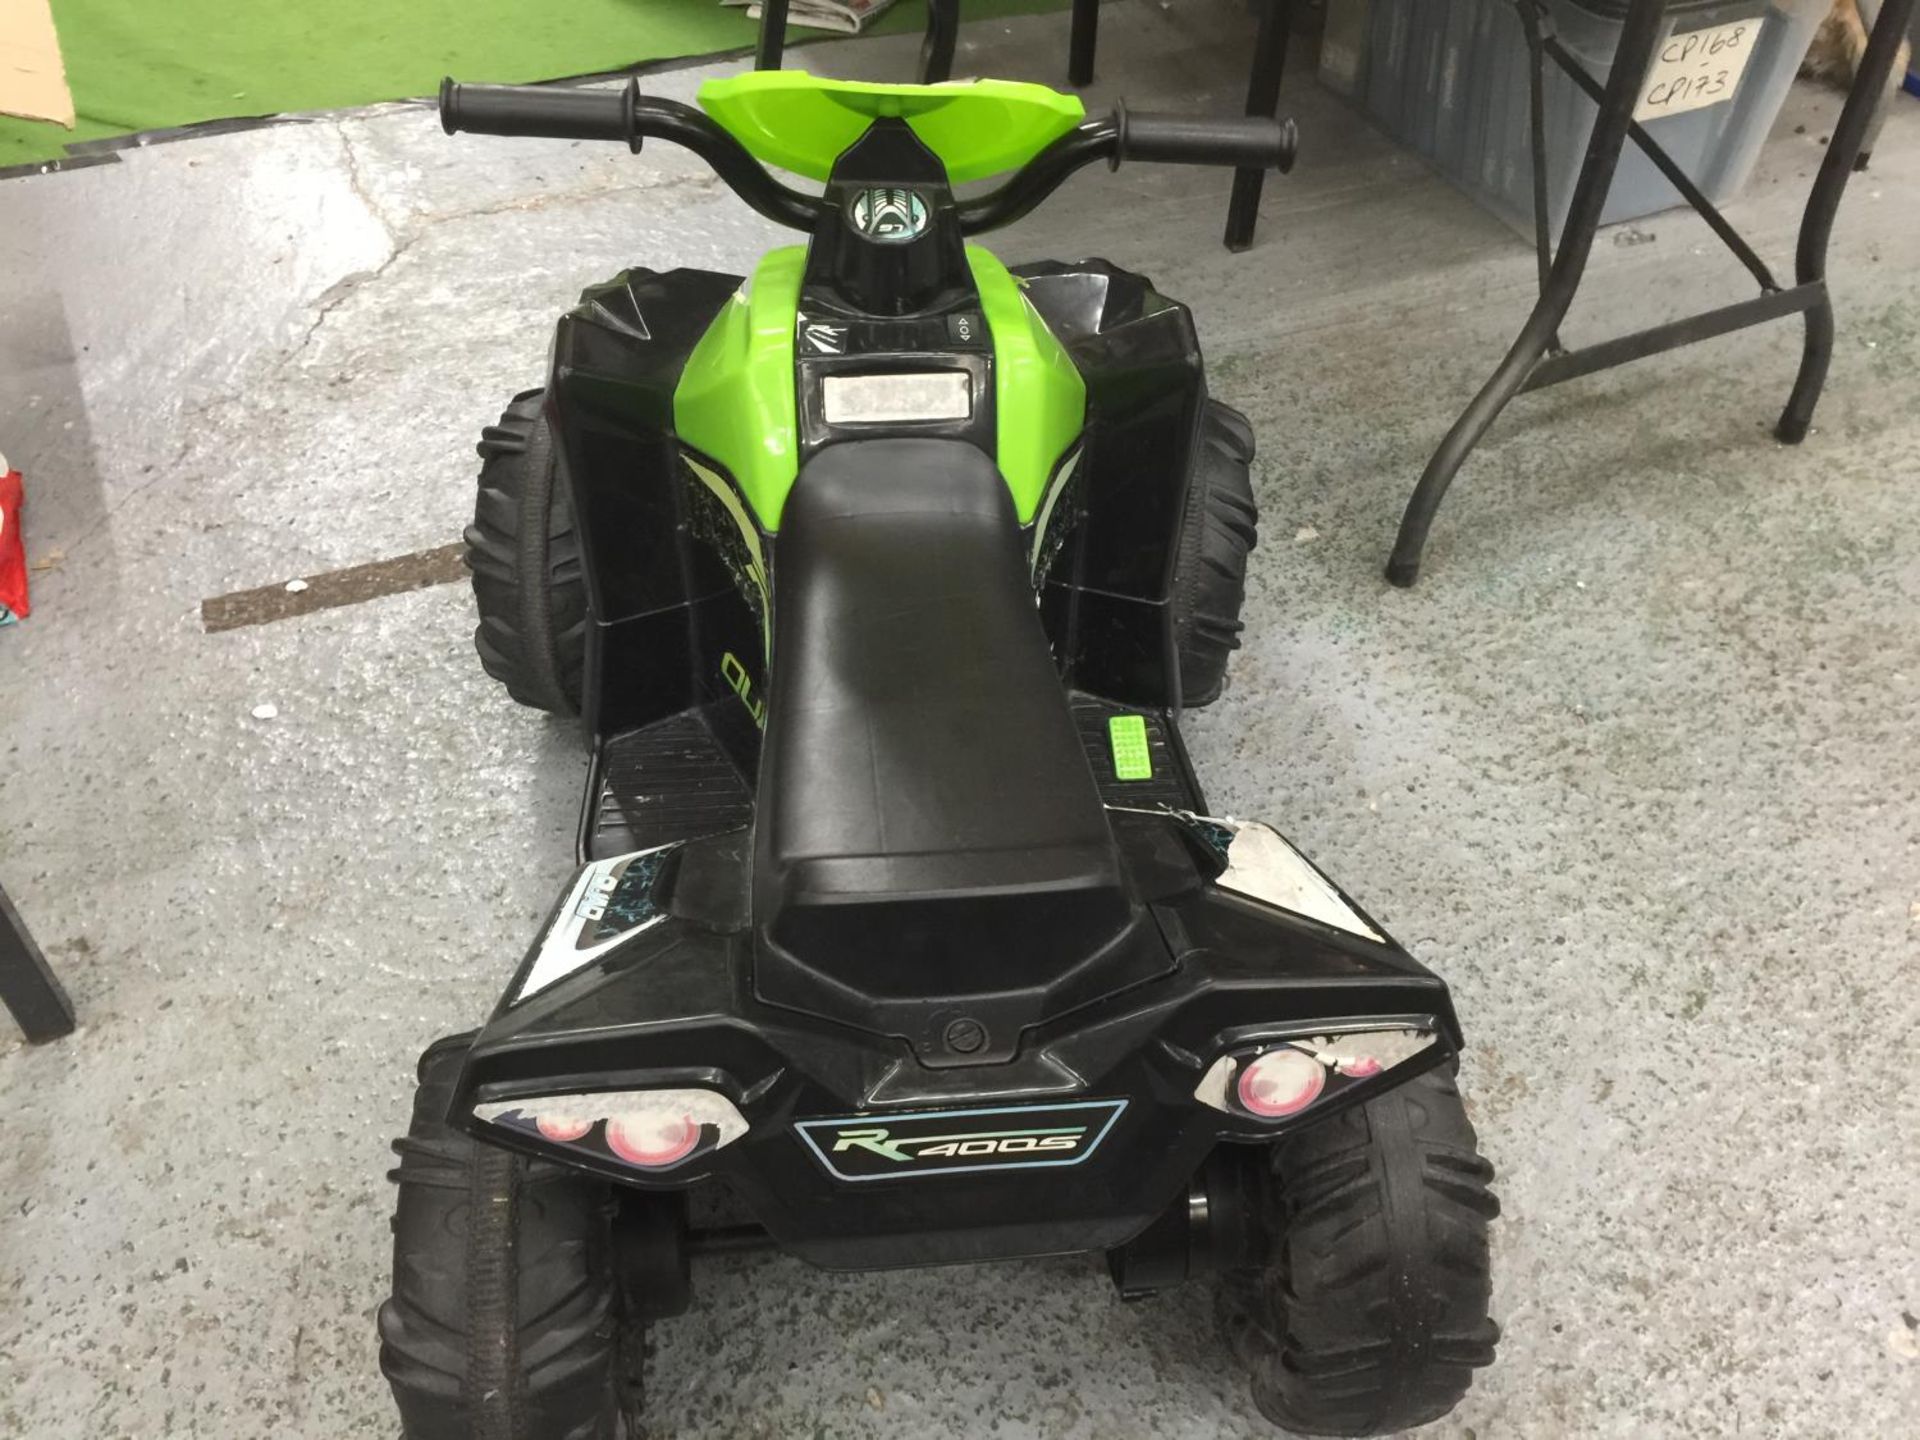 A CHILDREN'S ELECTRIC QUAD BIKE WITH CHARGER - VENDOR STATES IN WORKING ORDER AND VERY LITTLE USE, - Bild 3 aus 3